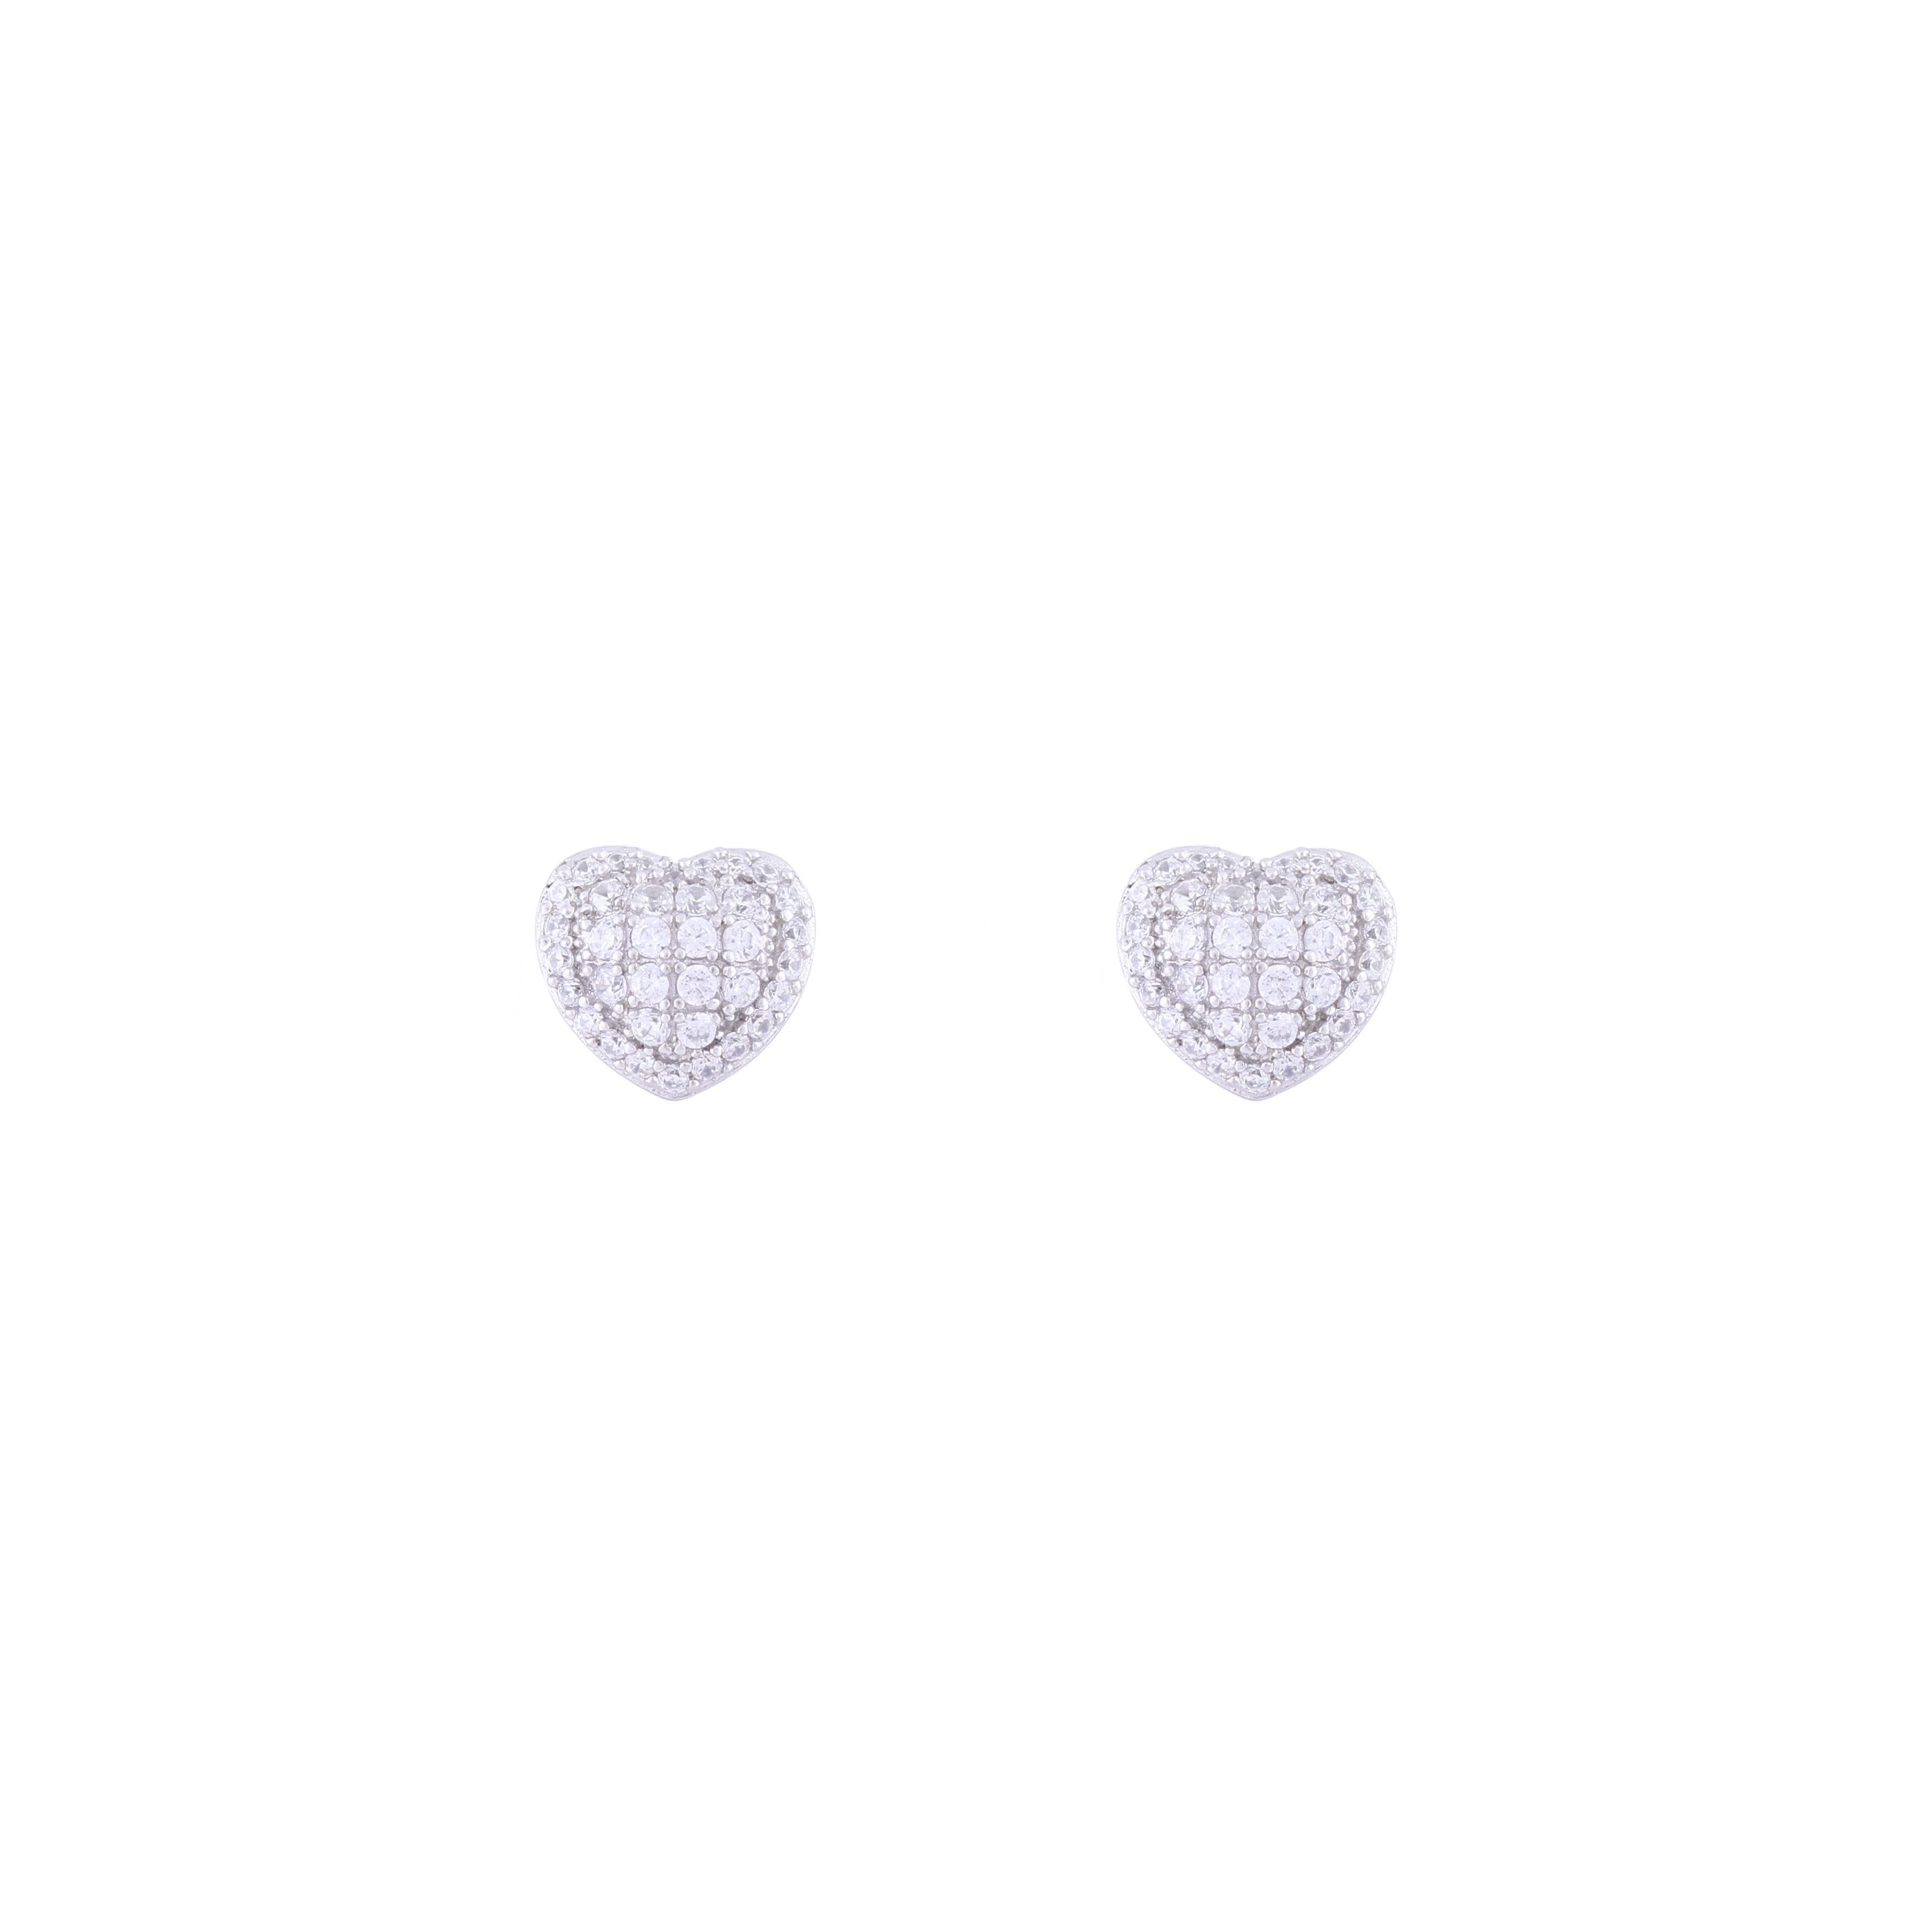 Asfour Crystal 925 Sterling Silver Stud Earring With Heart Design